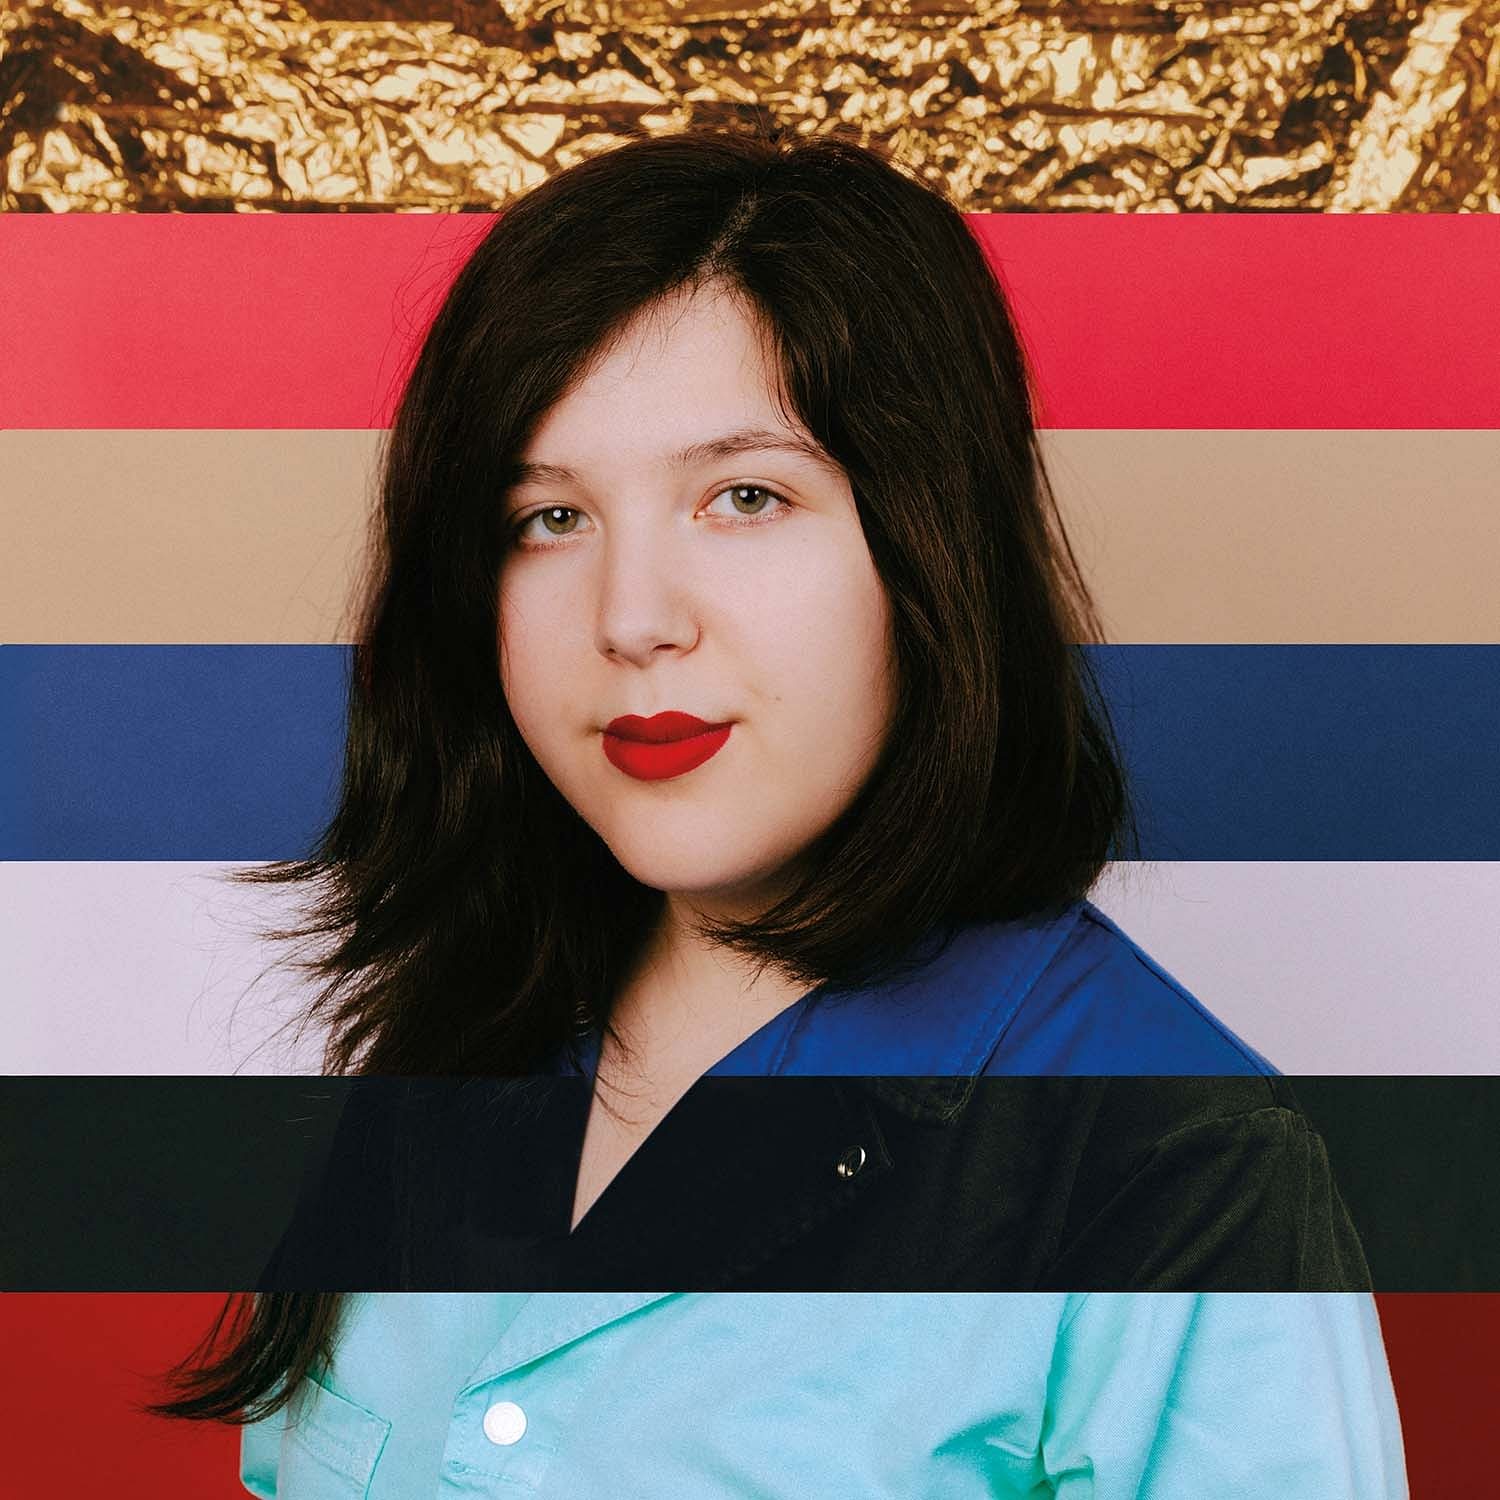 Review: Lucy Dacus, “Night Shift”